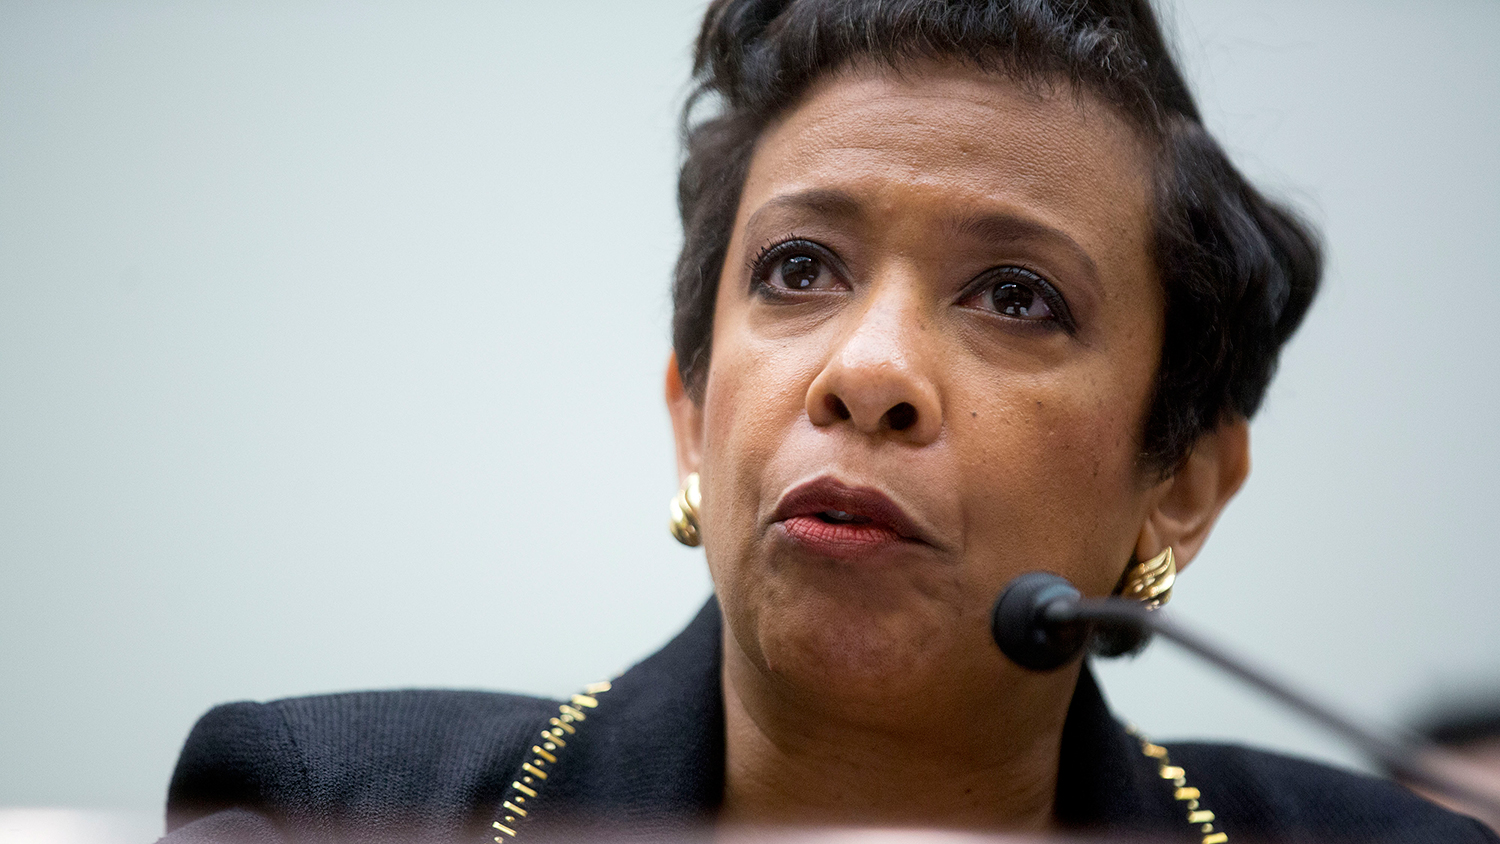 Loretta Lynch, U.S. attorney general, speaks during a House Judiciary Committee hearing in Washington on Nov. 17, 2015.
